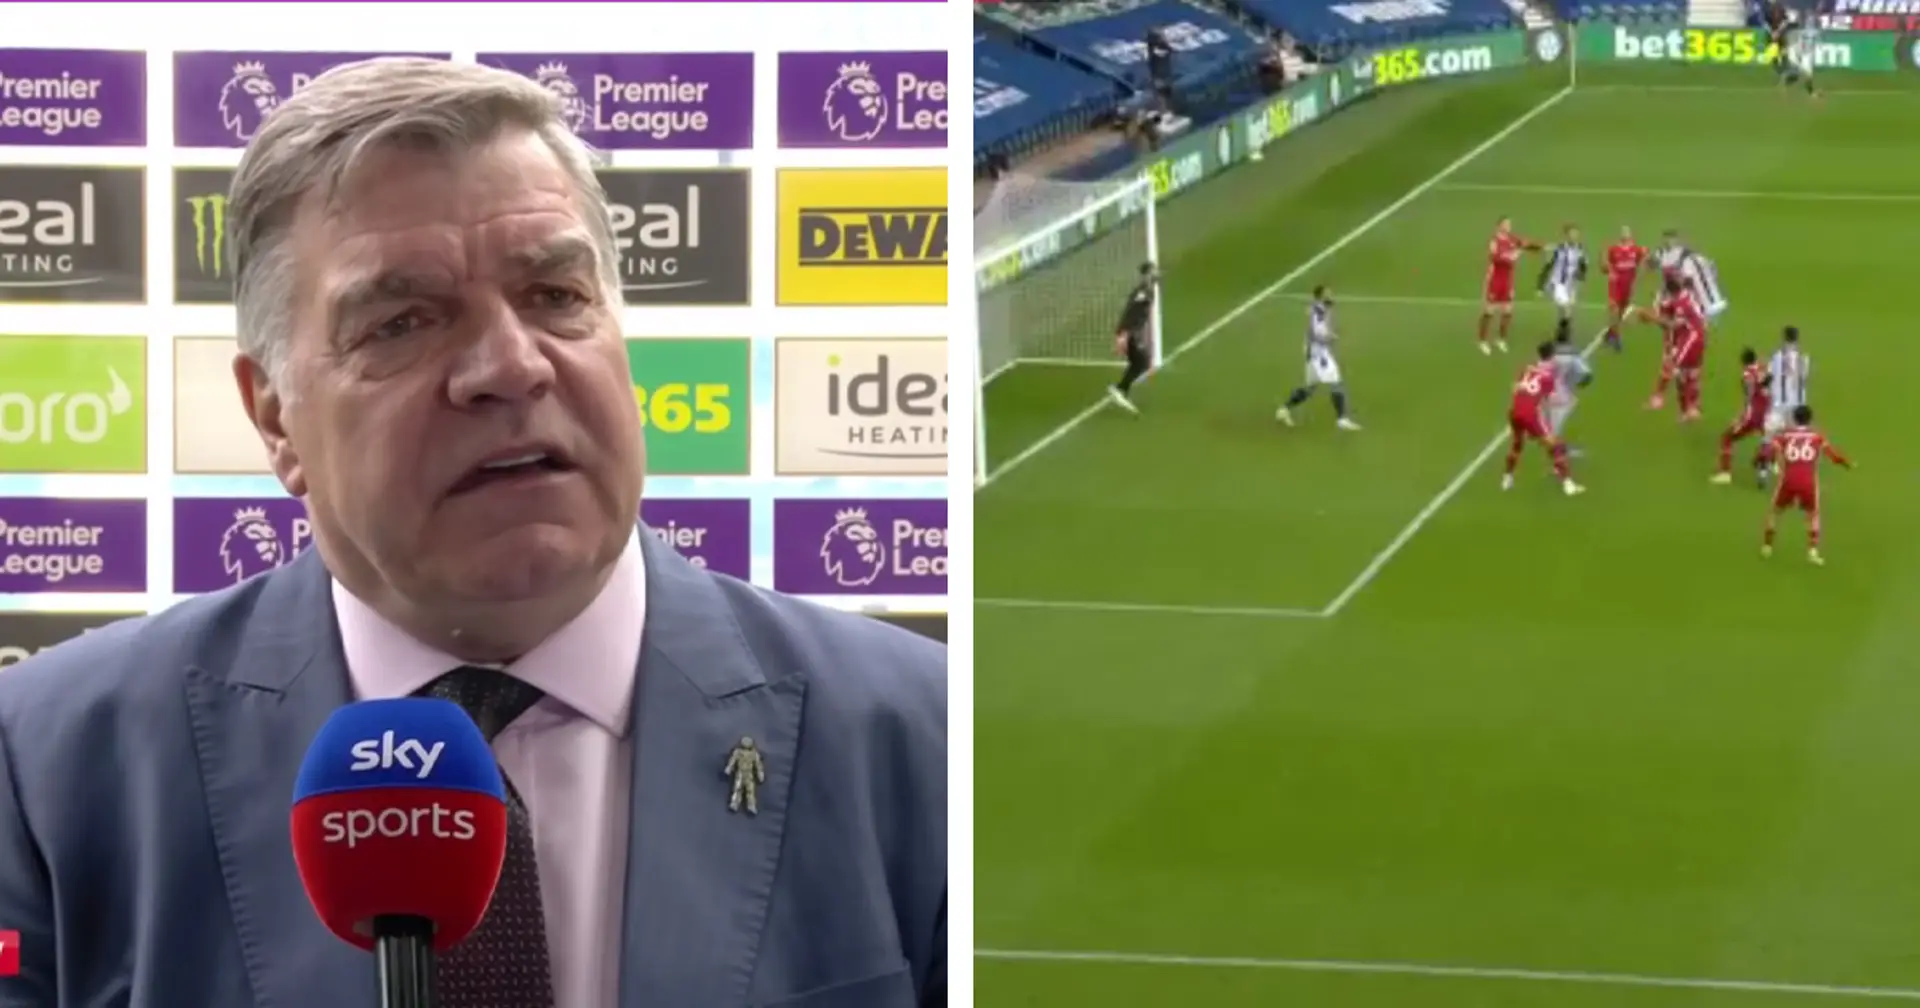 'Main reason why we lost': Sam Allardyce slams VAR decisions that went against West Brom in Liverpool win